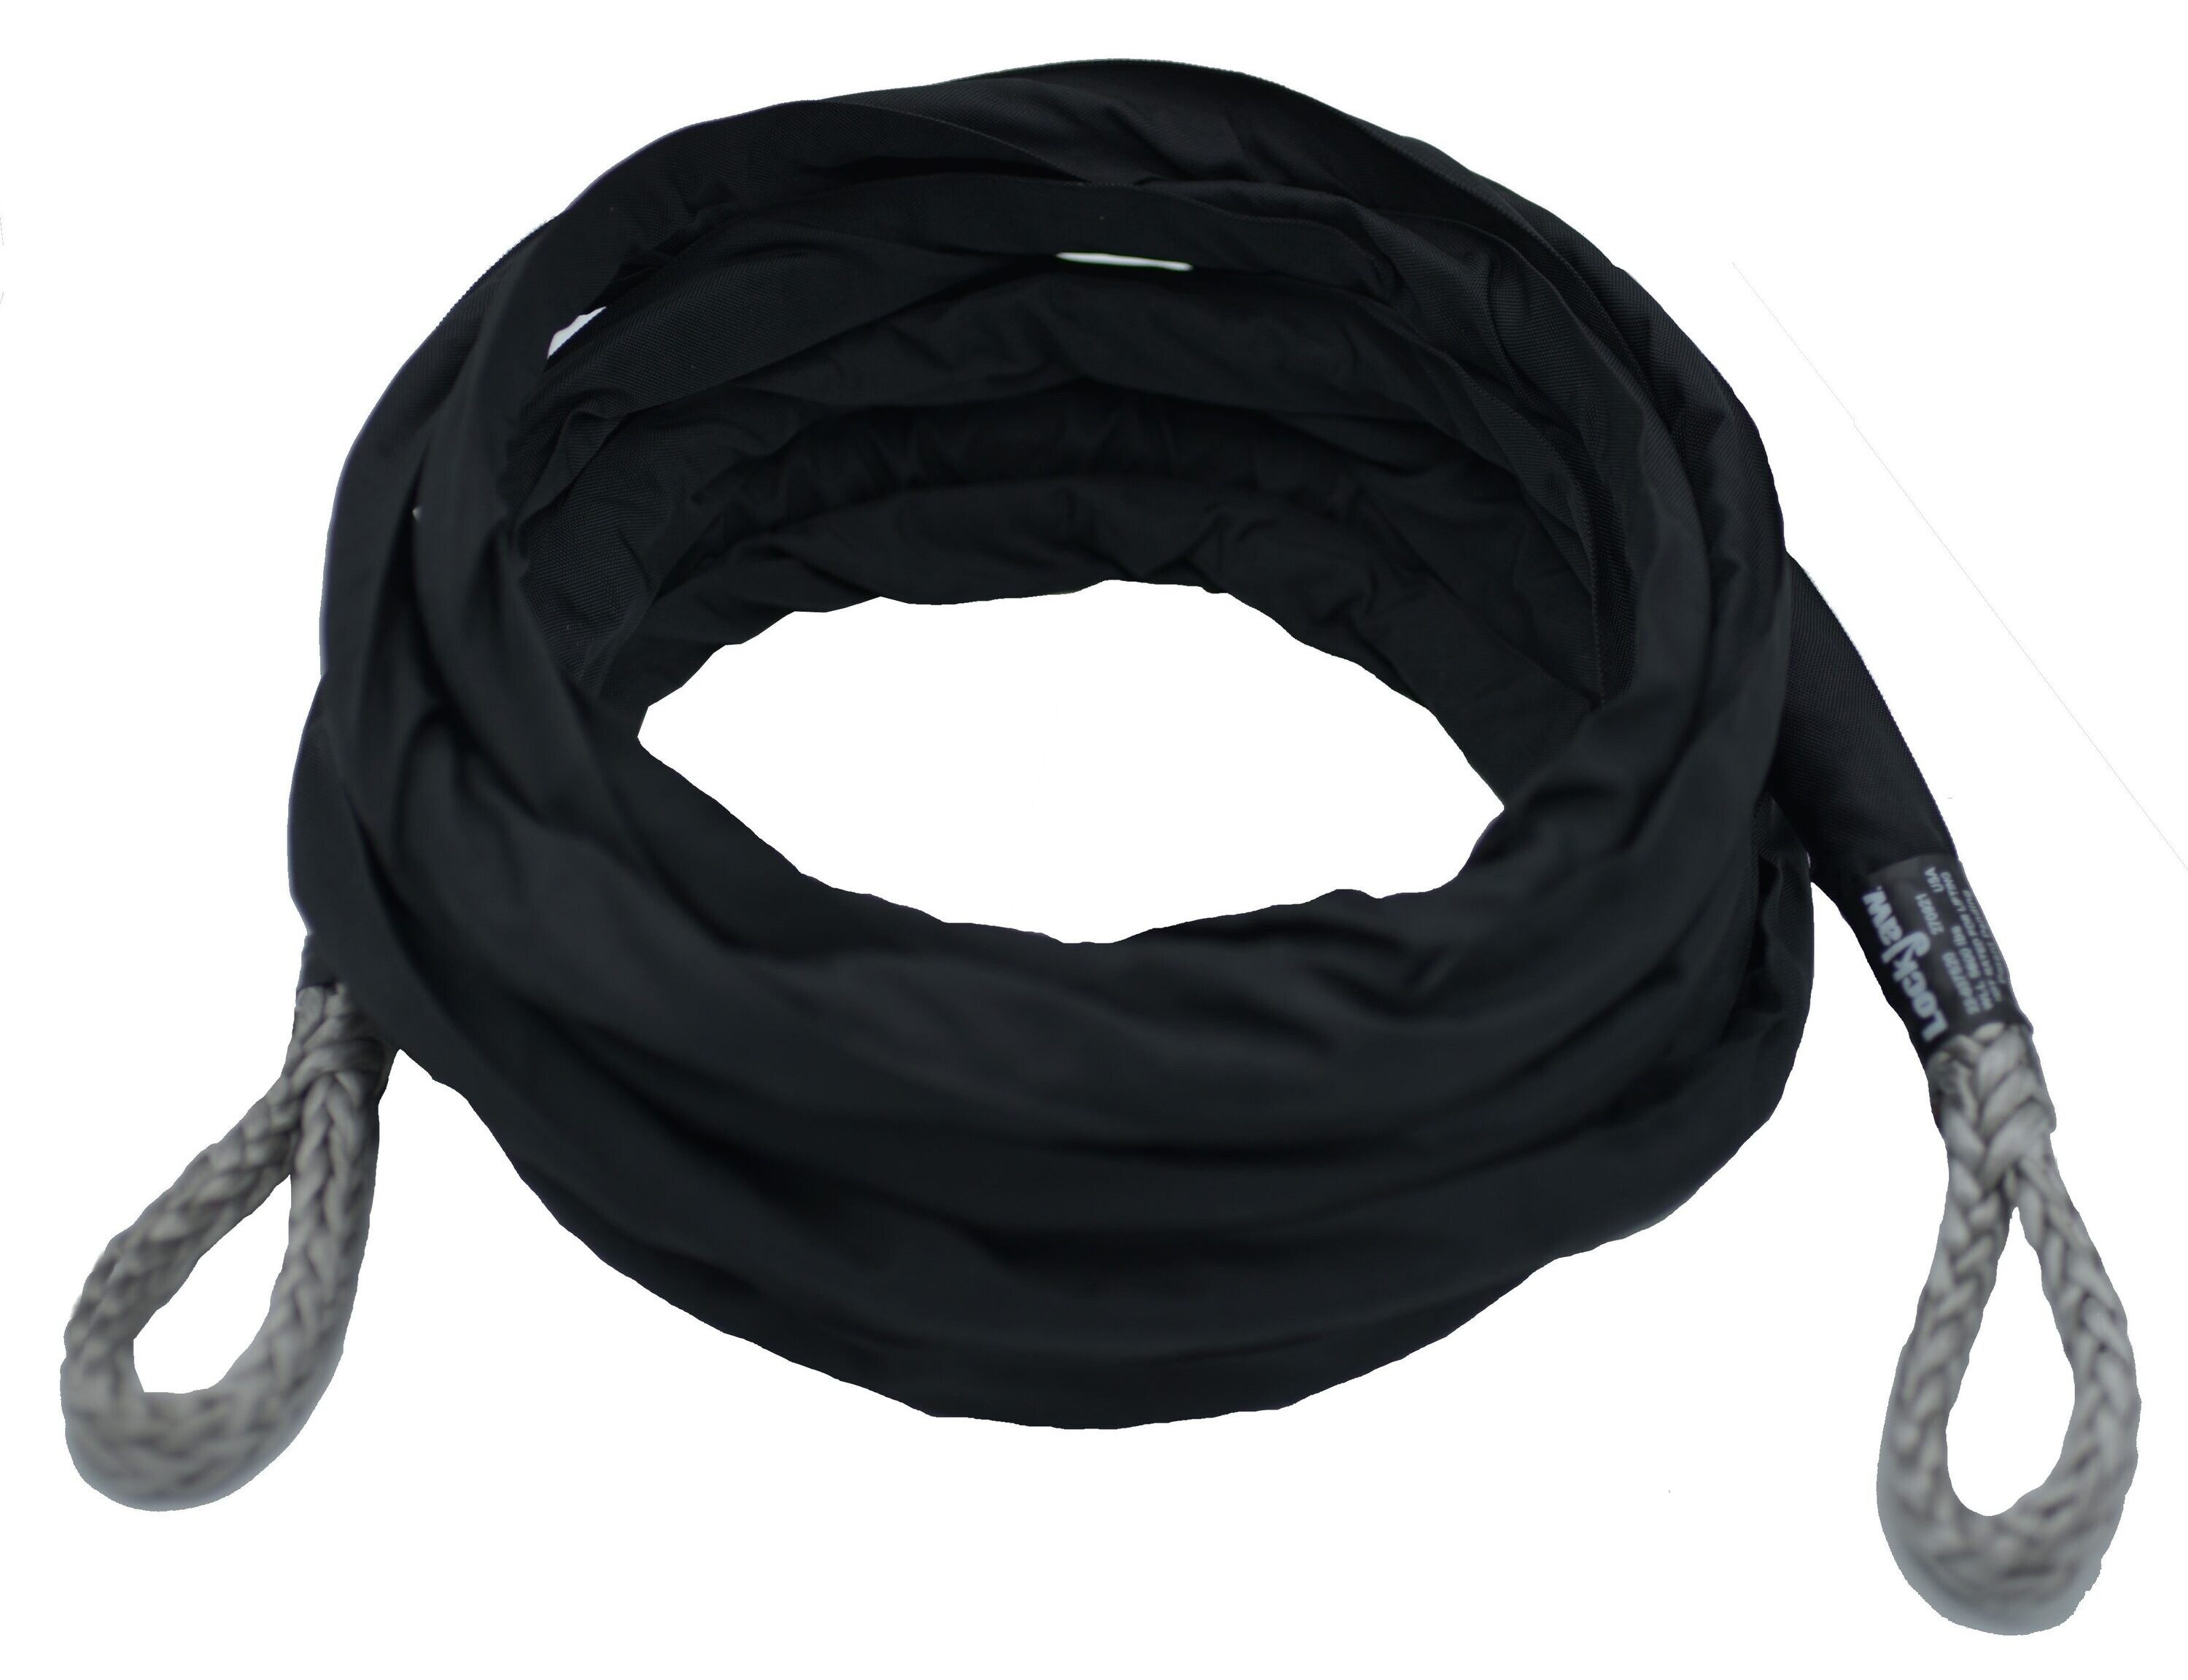 Tow Strap 2 x 25', Truck Accessories, Tow Straps & Ropes